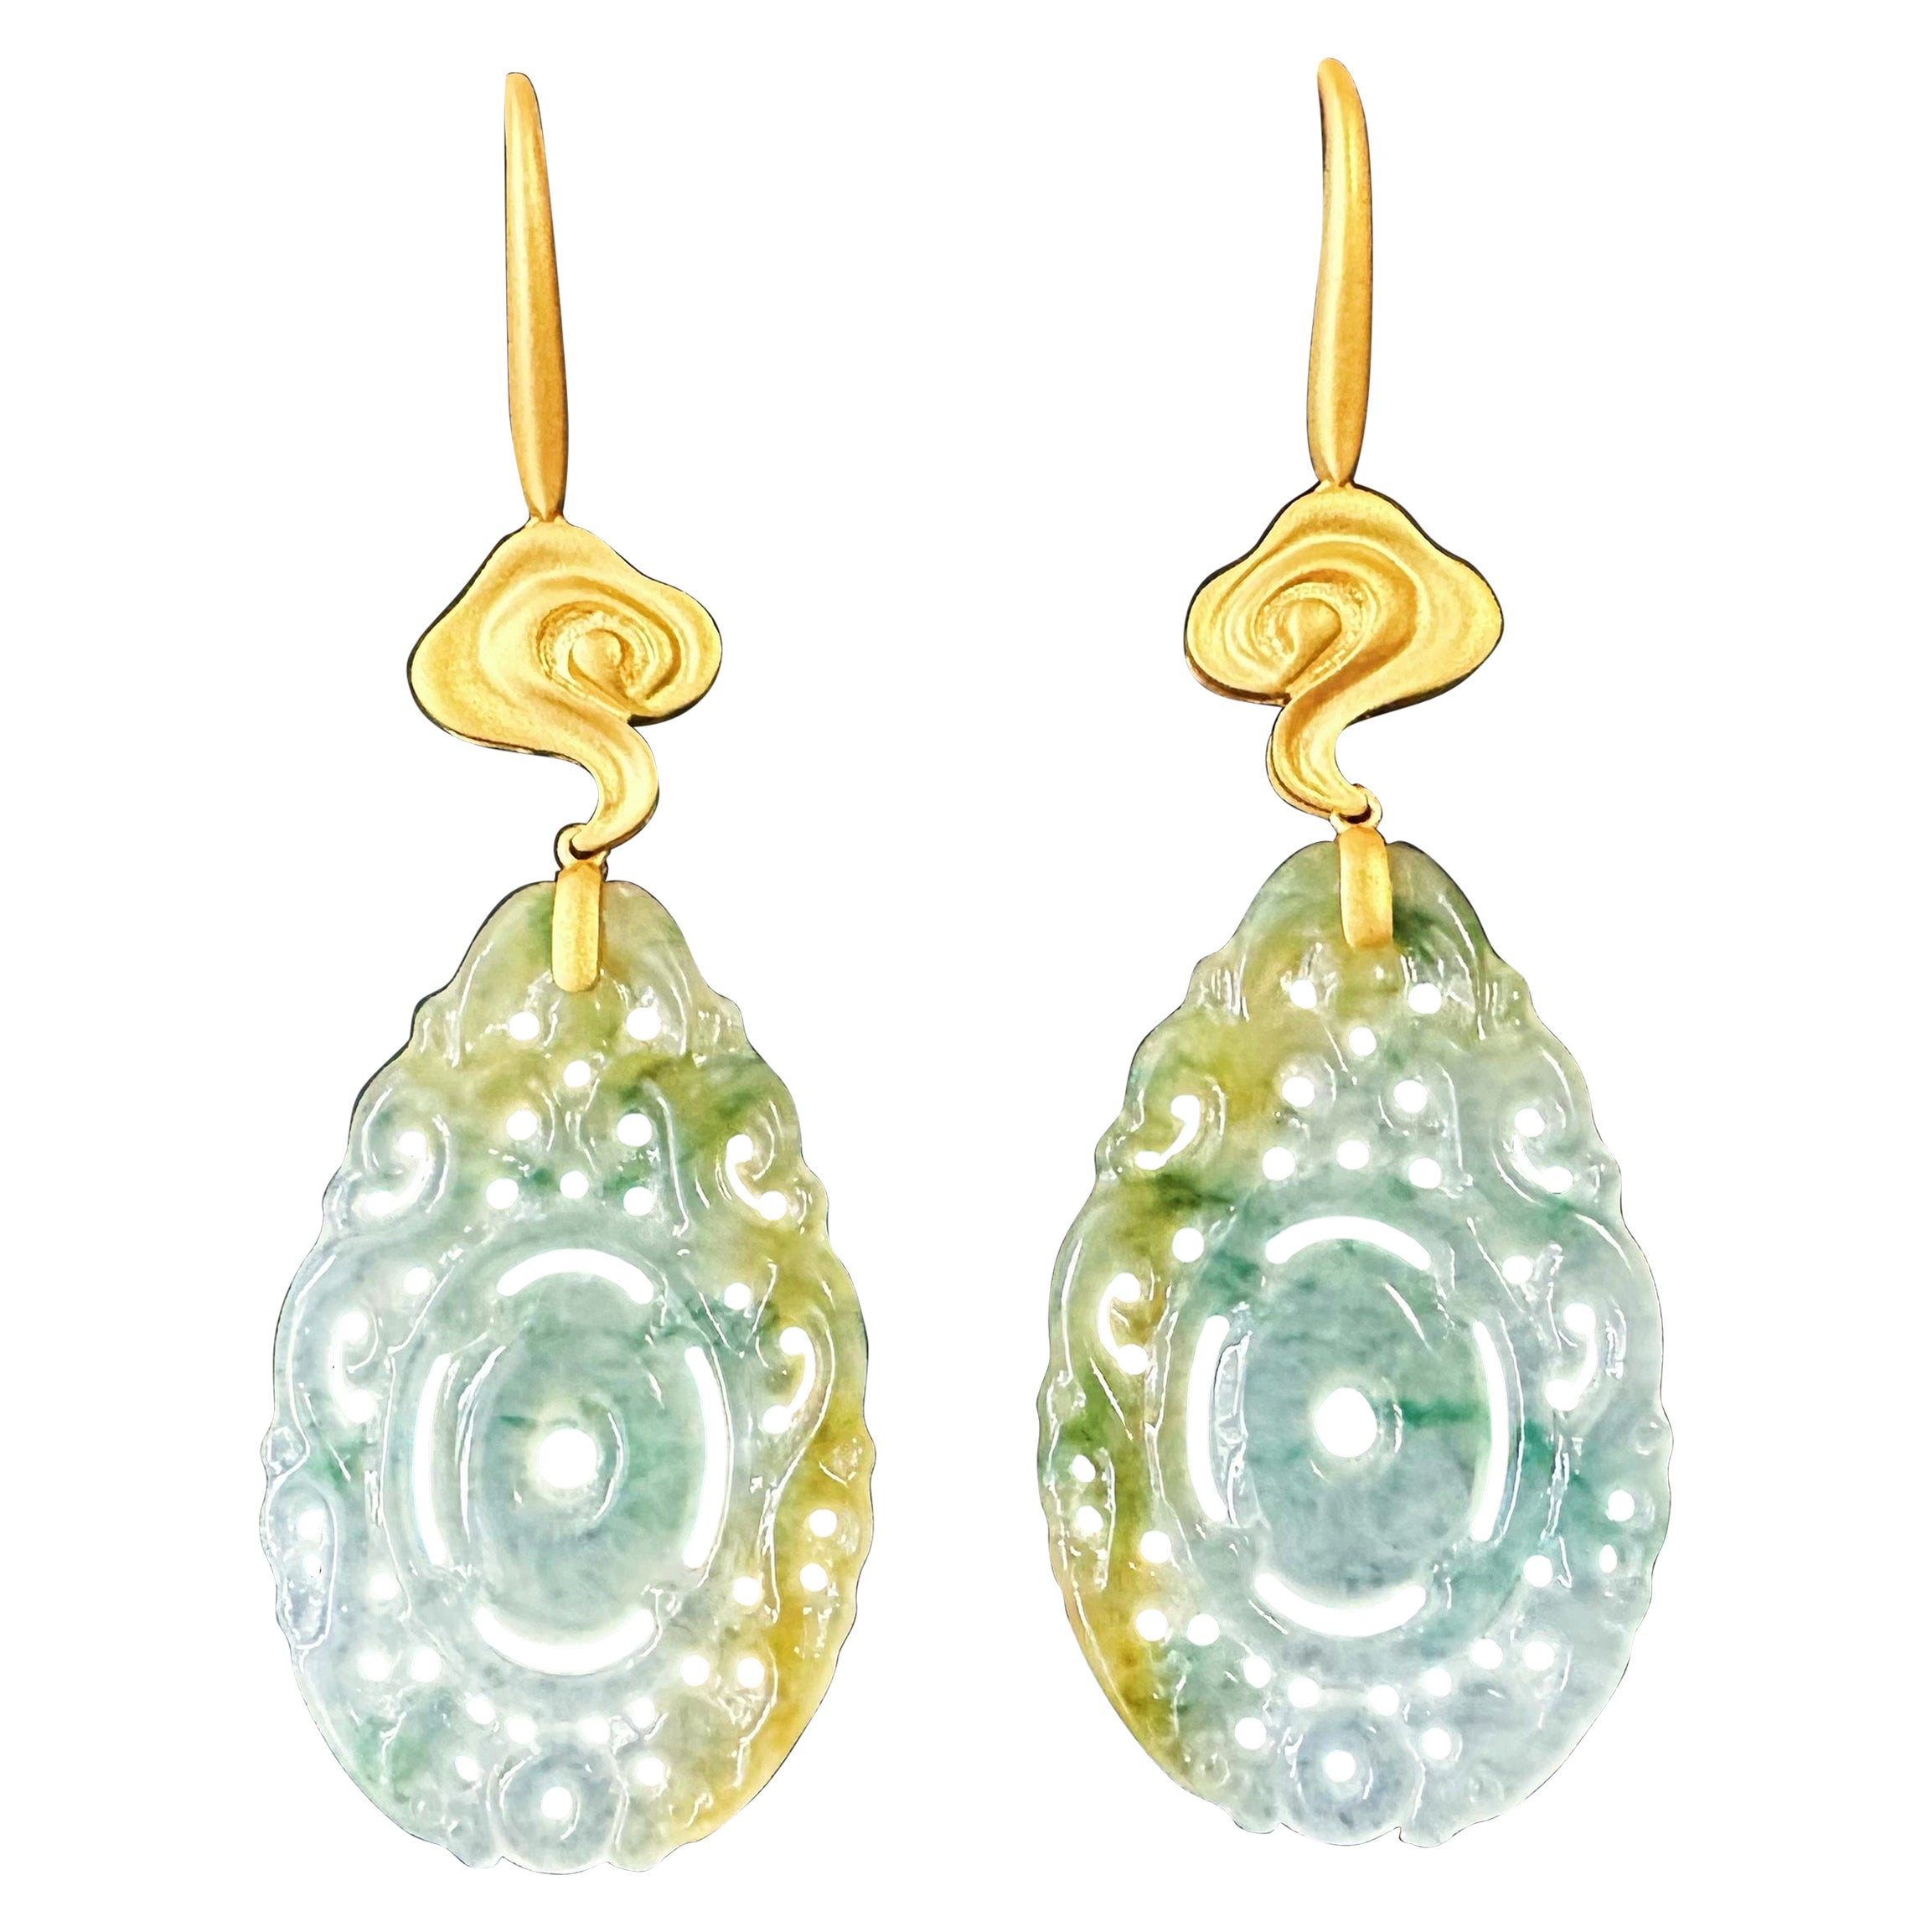 Natural Myanmar Handcrafted Icy Type Bicolor Green and Yellow Jade Earrings For Sale